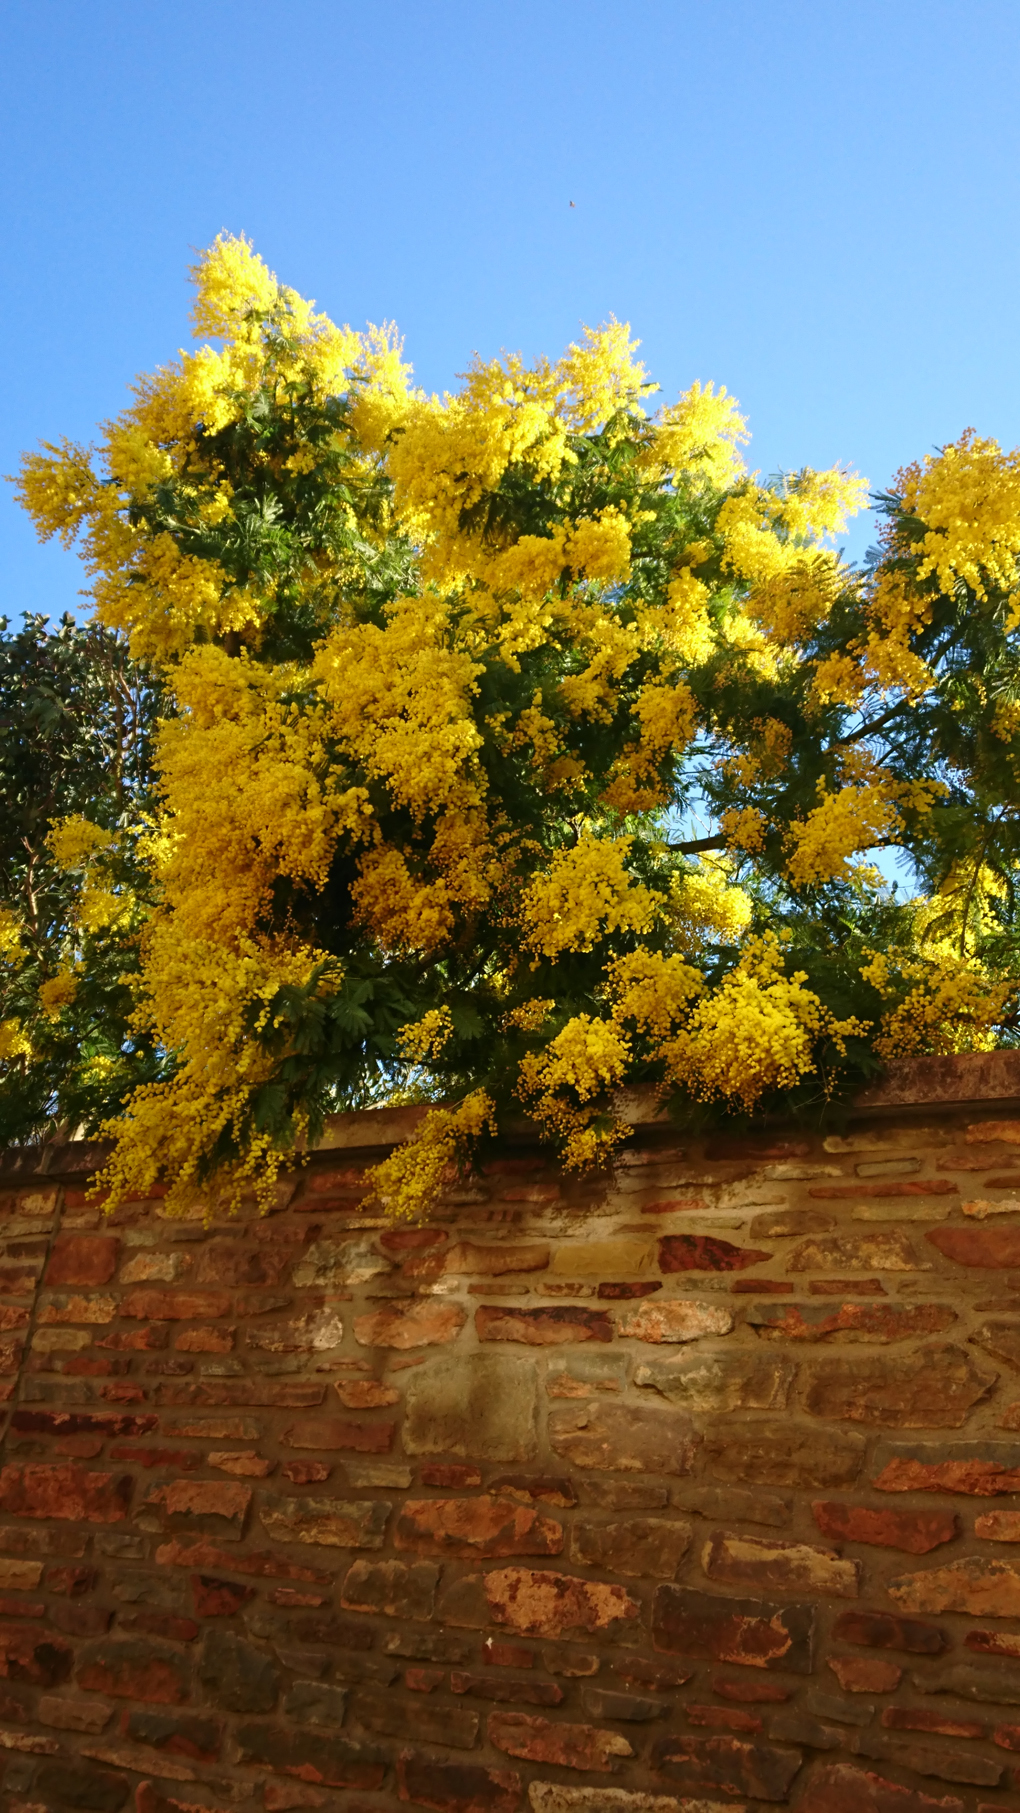 I encountered a Mimosa tree hanging over a pretty new garden . It created a huge splash of gold over the orangey wall on a nice sunny day. Food for the soul!